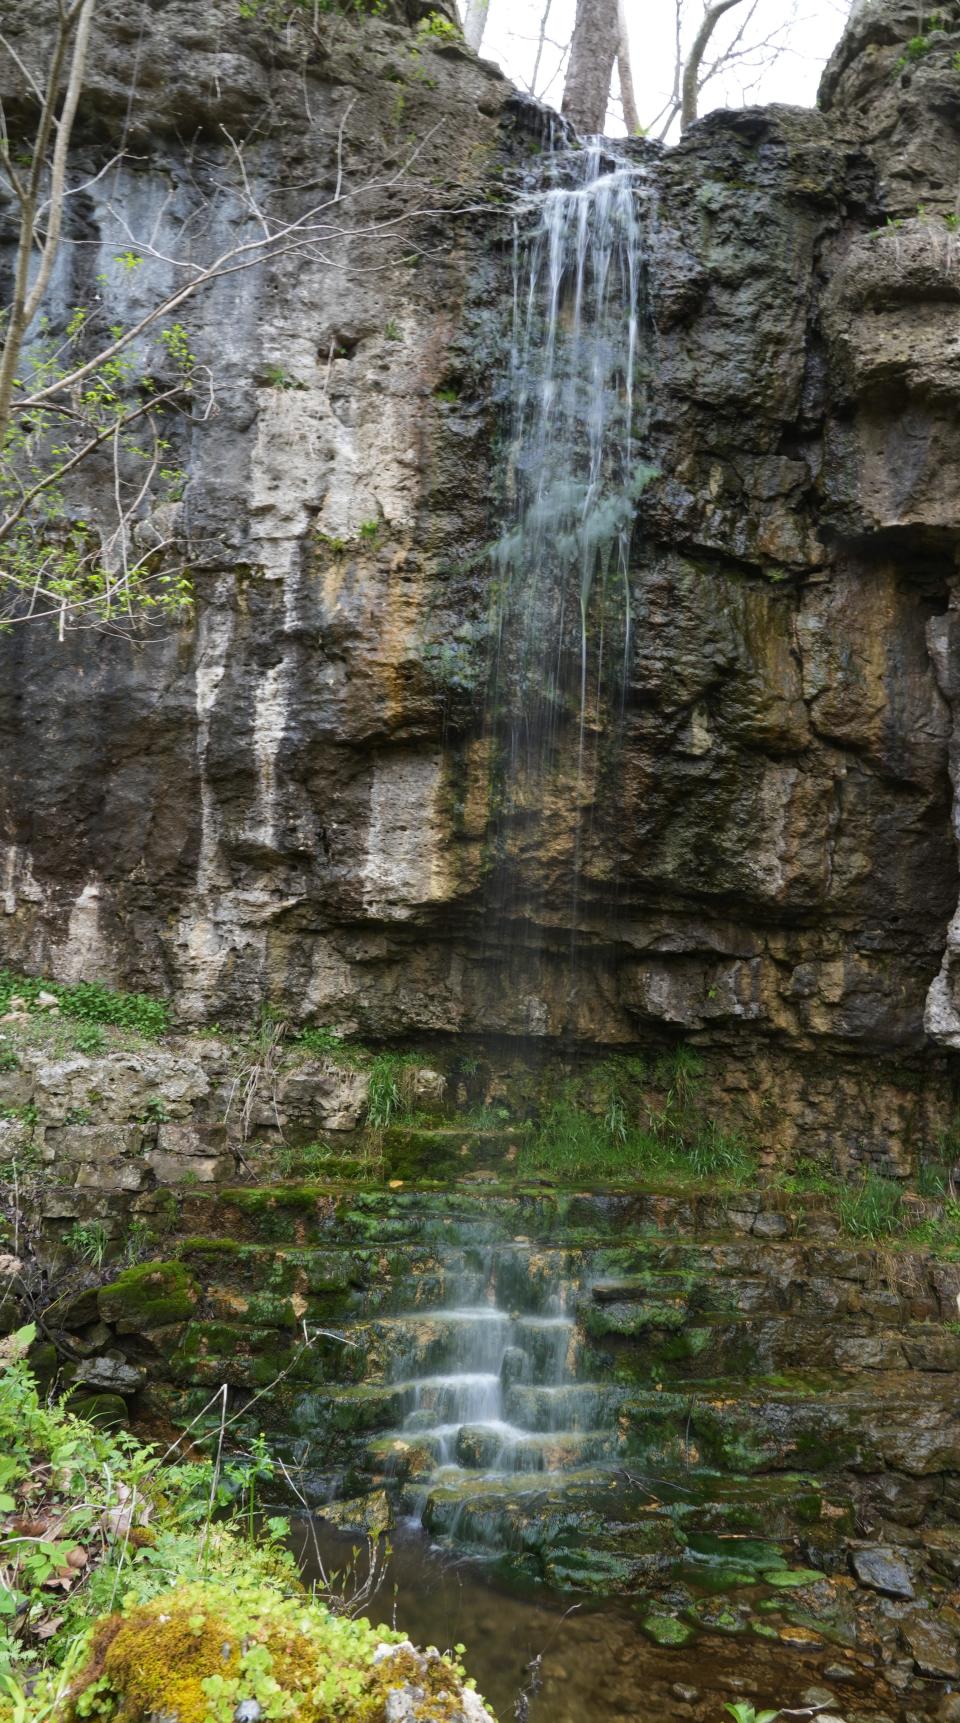 Amphitheatre Falls flows in Clifton Gorge State Nature Preserve in Yellow Springs, Ohio. In addition to this view, there is a hiking trail leading visitors to the top of the waterfall.